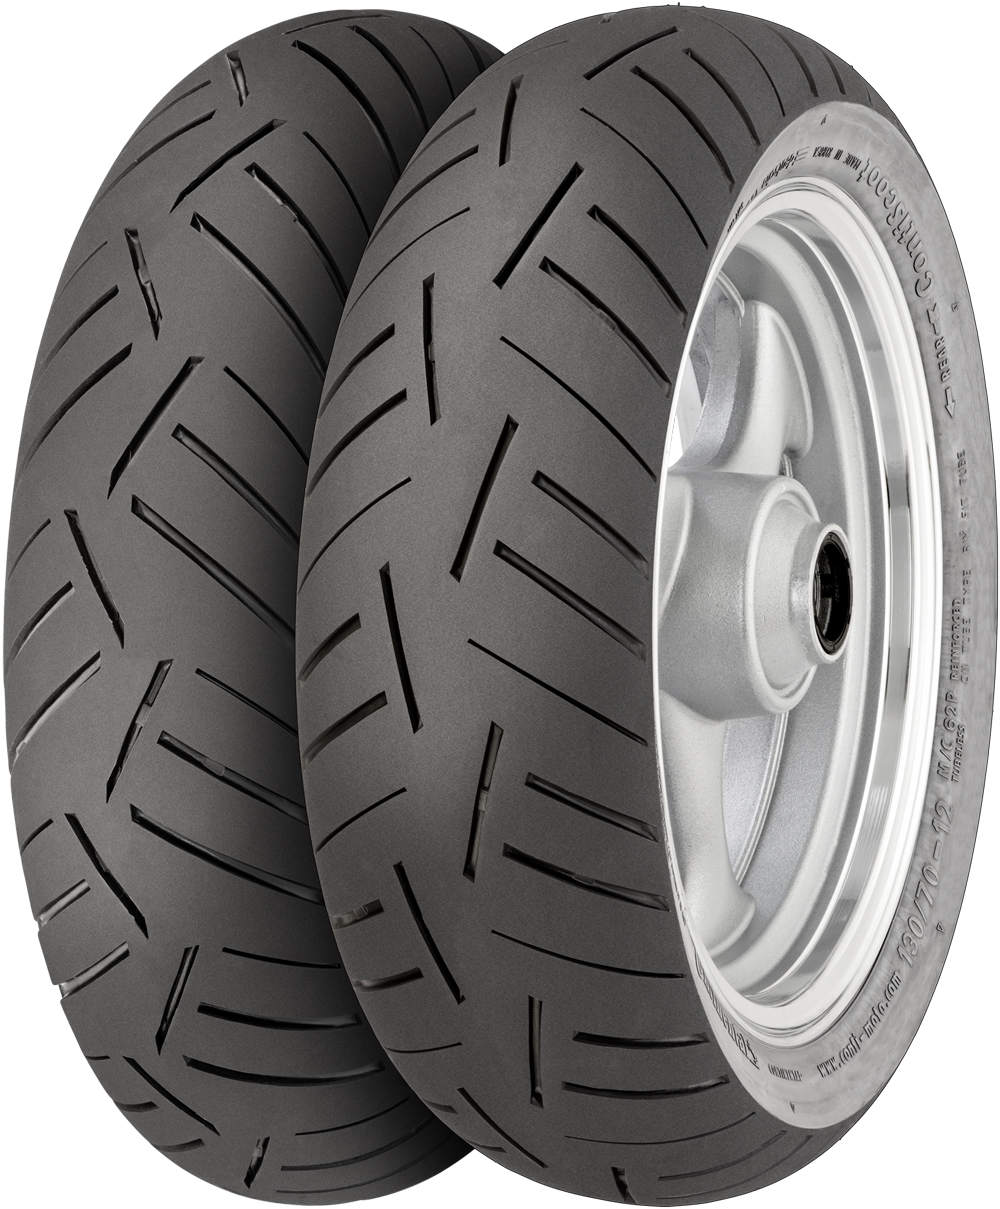 product_type-moto_tires CONTINENTAL CONTISCOOT 120/70 R14 55P